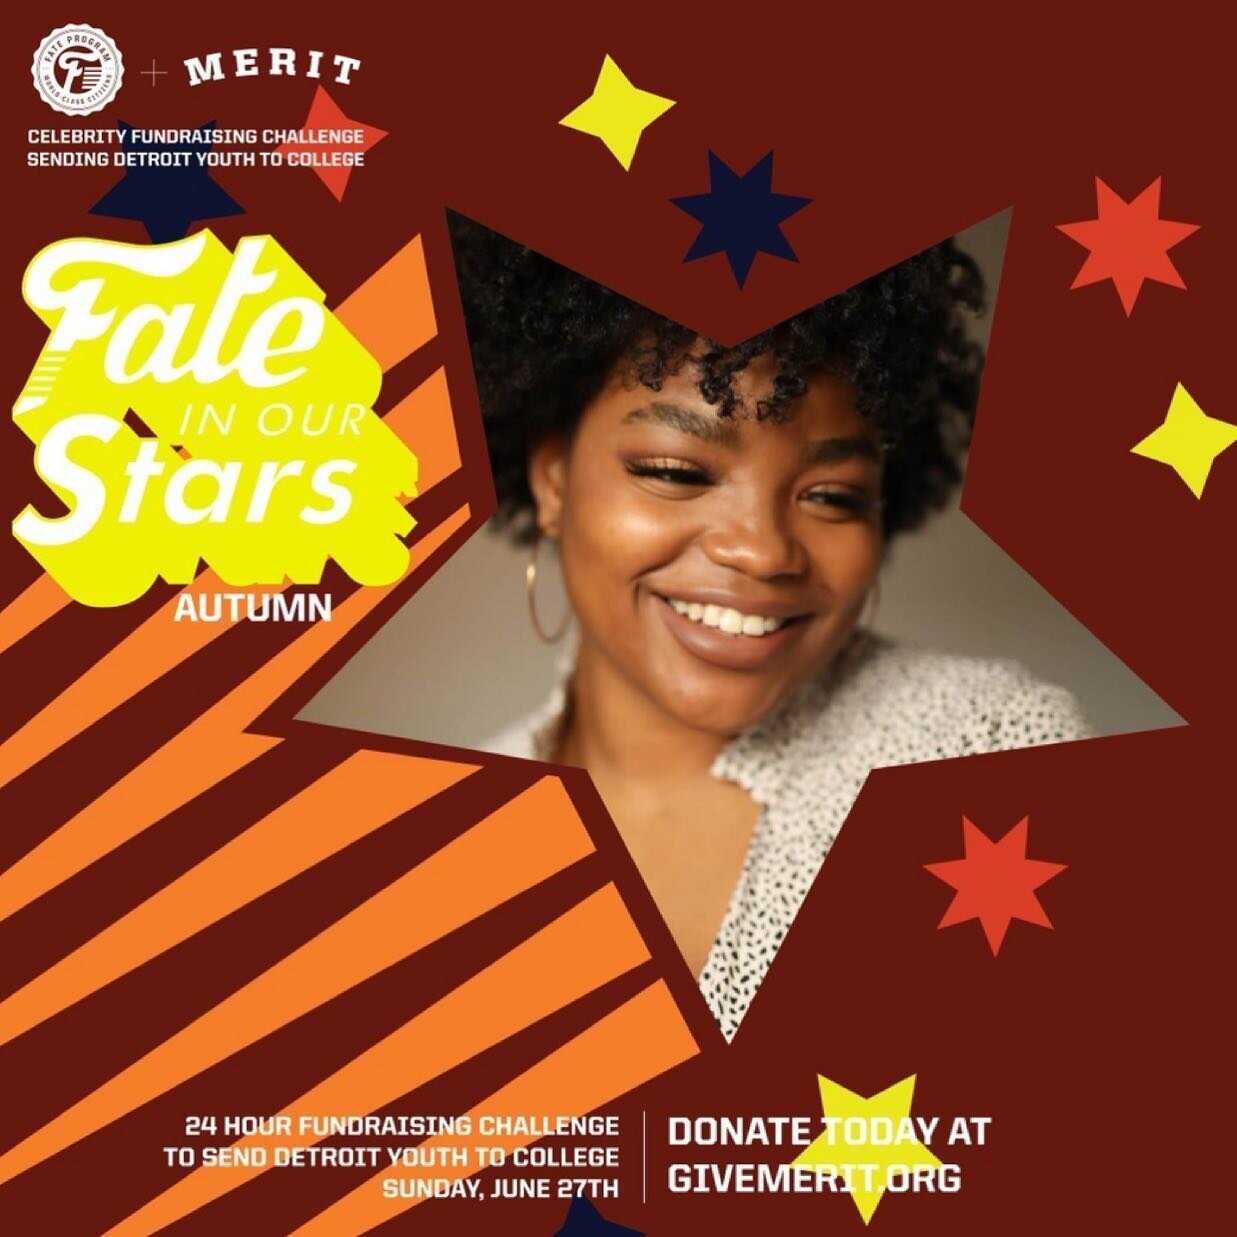 In a world where the fate of black youth is often predetermined, we believe each student holds a special gift - a dream ready to become reality. I'm honored to be selected to TEAM STARS for the #FateinOurStars Fundraising Challenge and have partnered